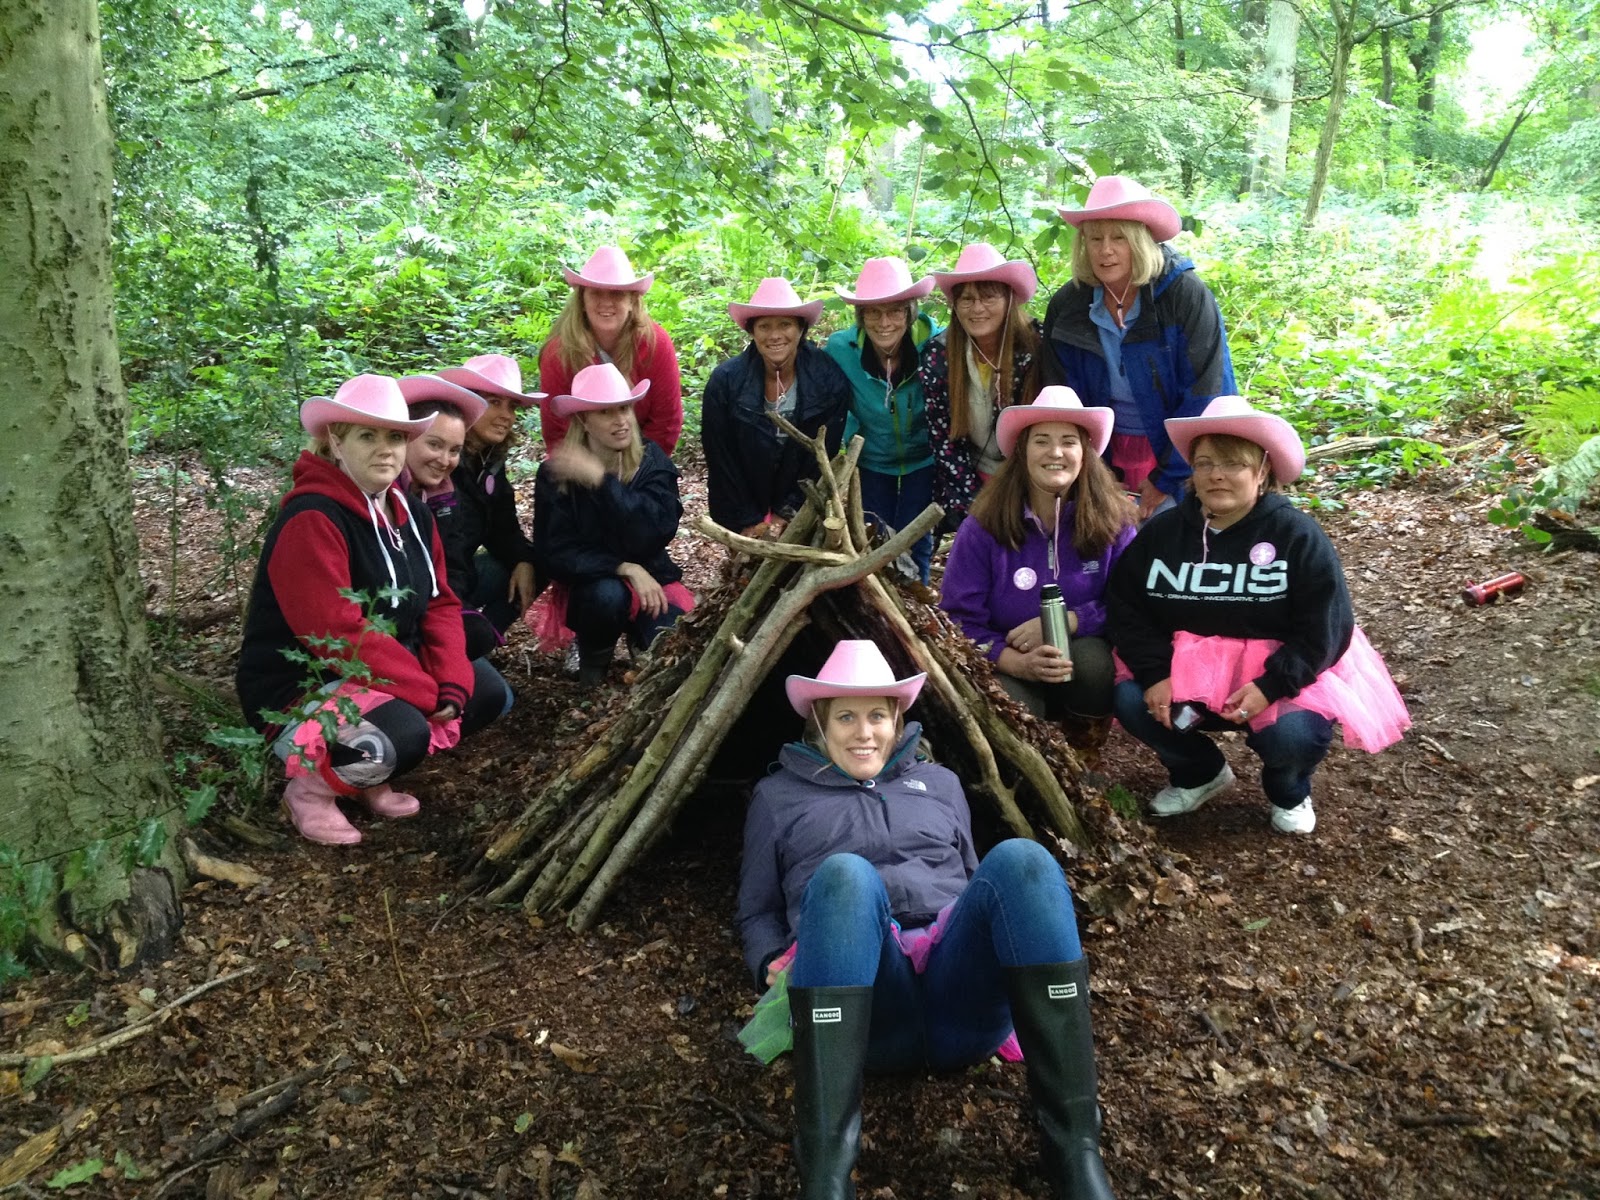 BABES IN THE WOODS - WILD WOODLAND HEN DO'S IN THE ...